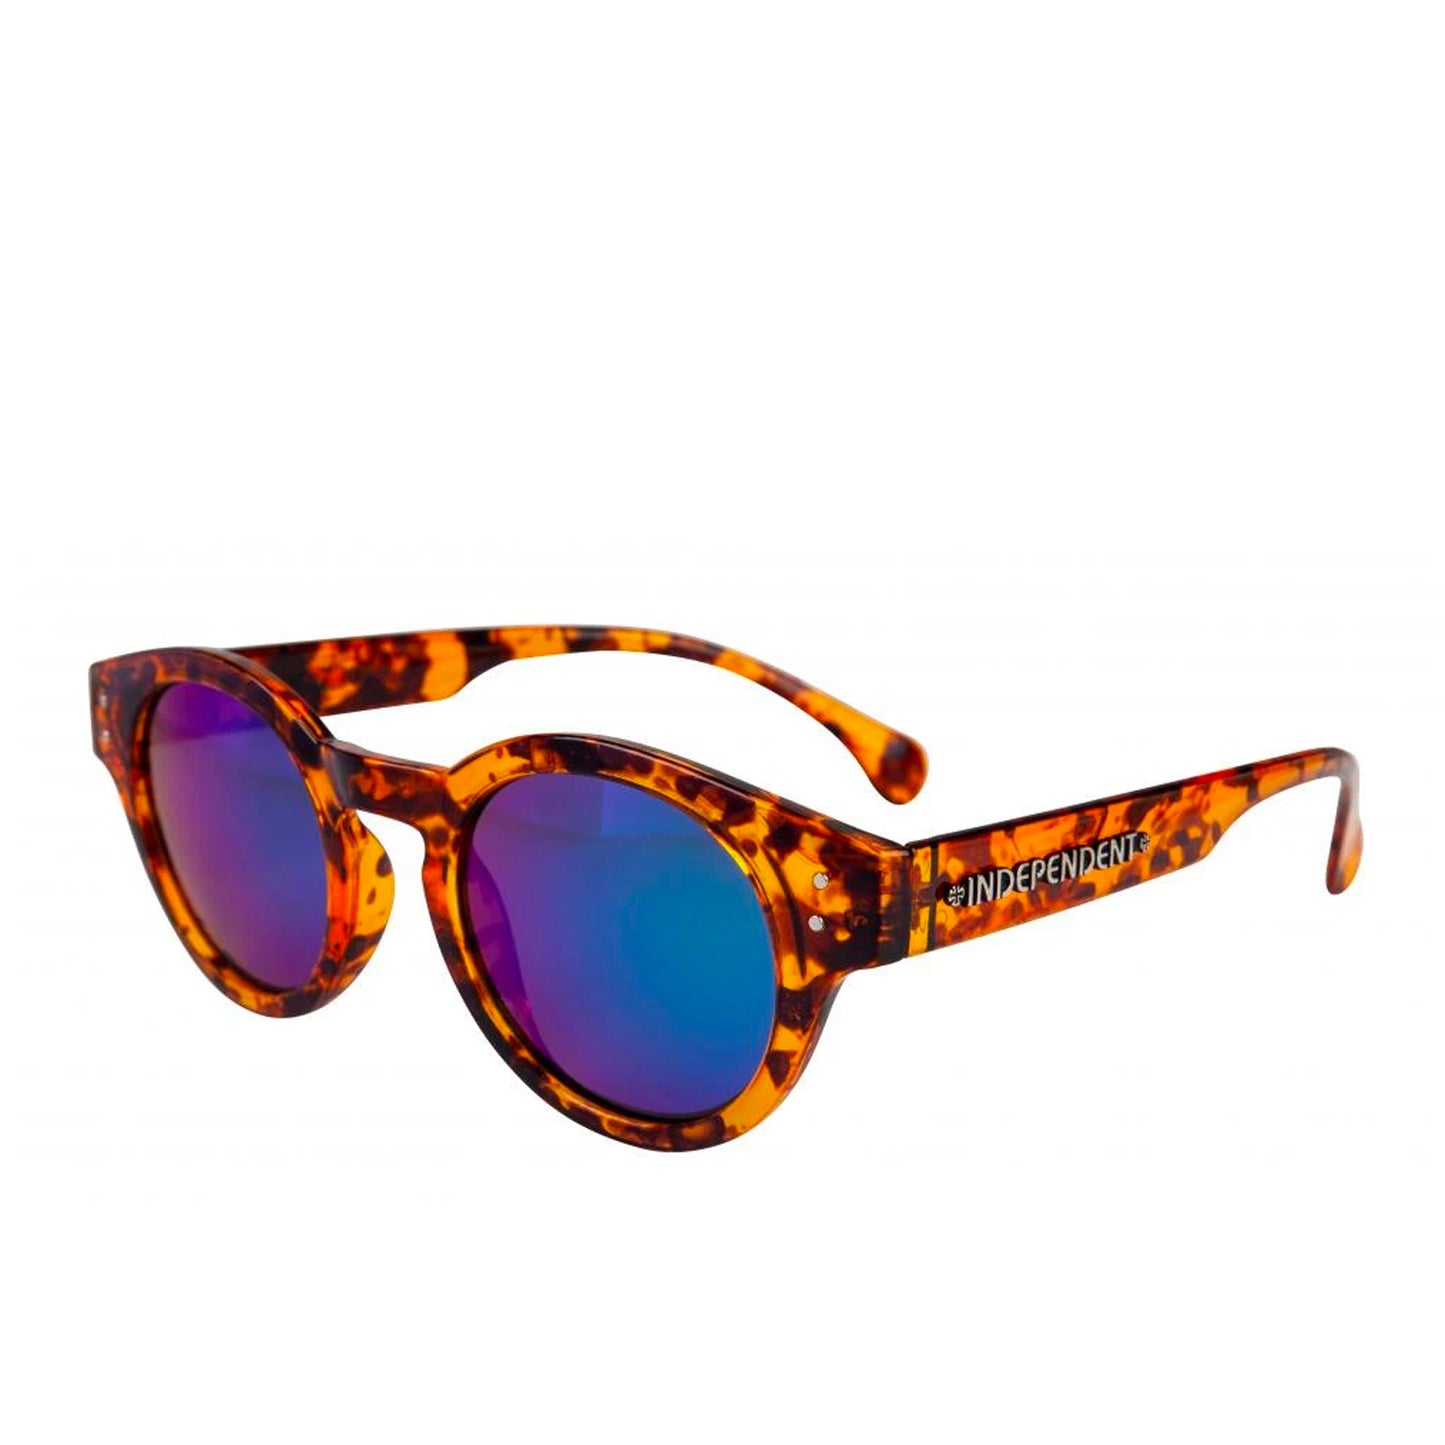 Independent Barrier Mirror Sunglasses - Tortoise Shell - Prime Delux Store